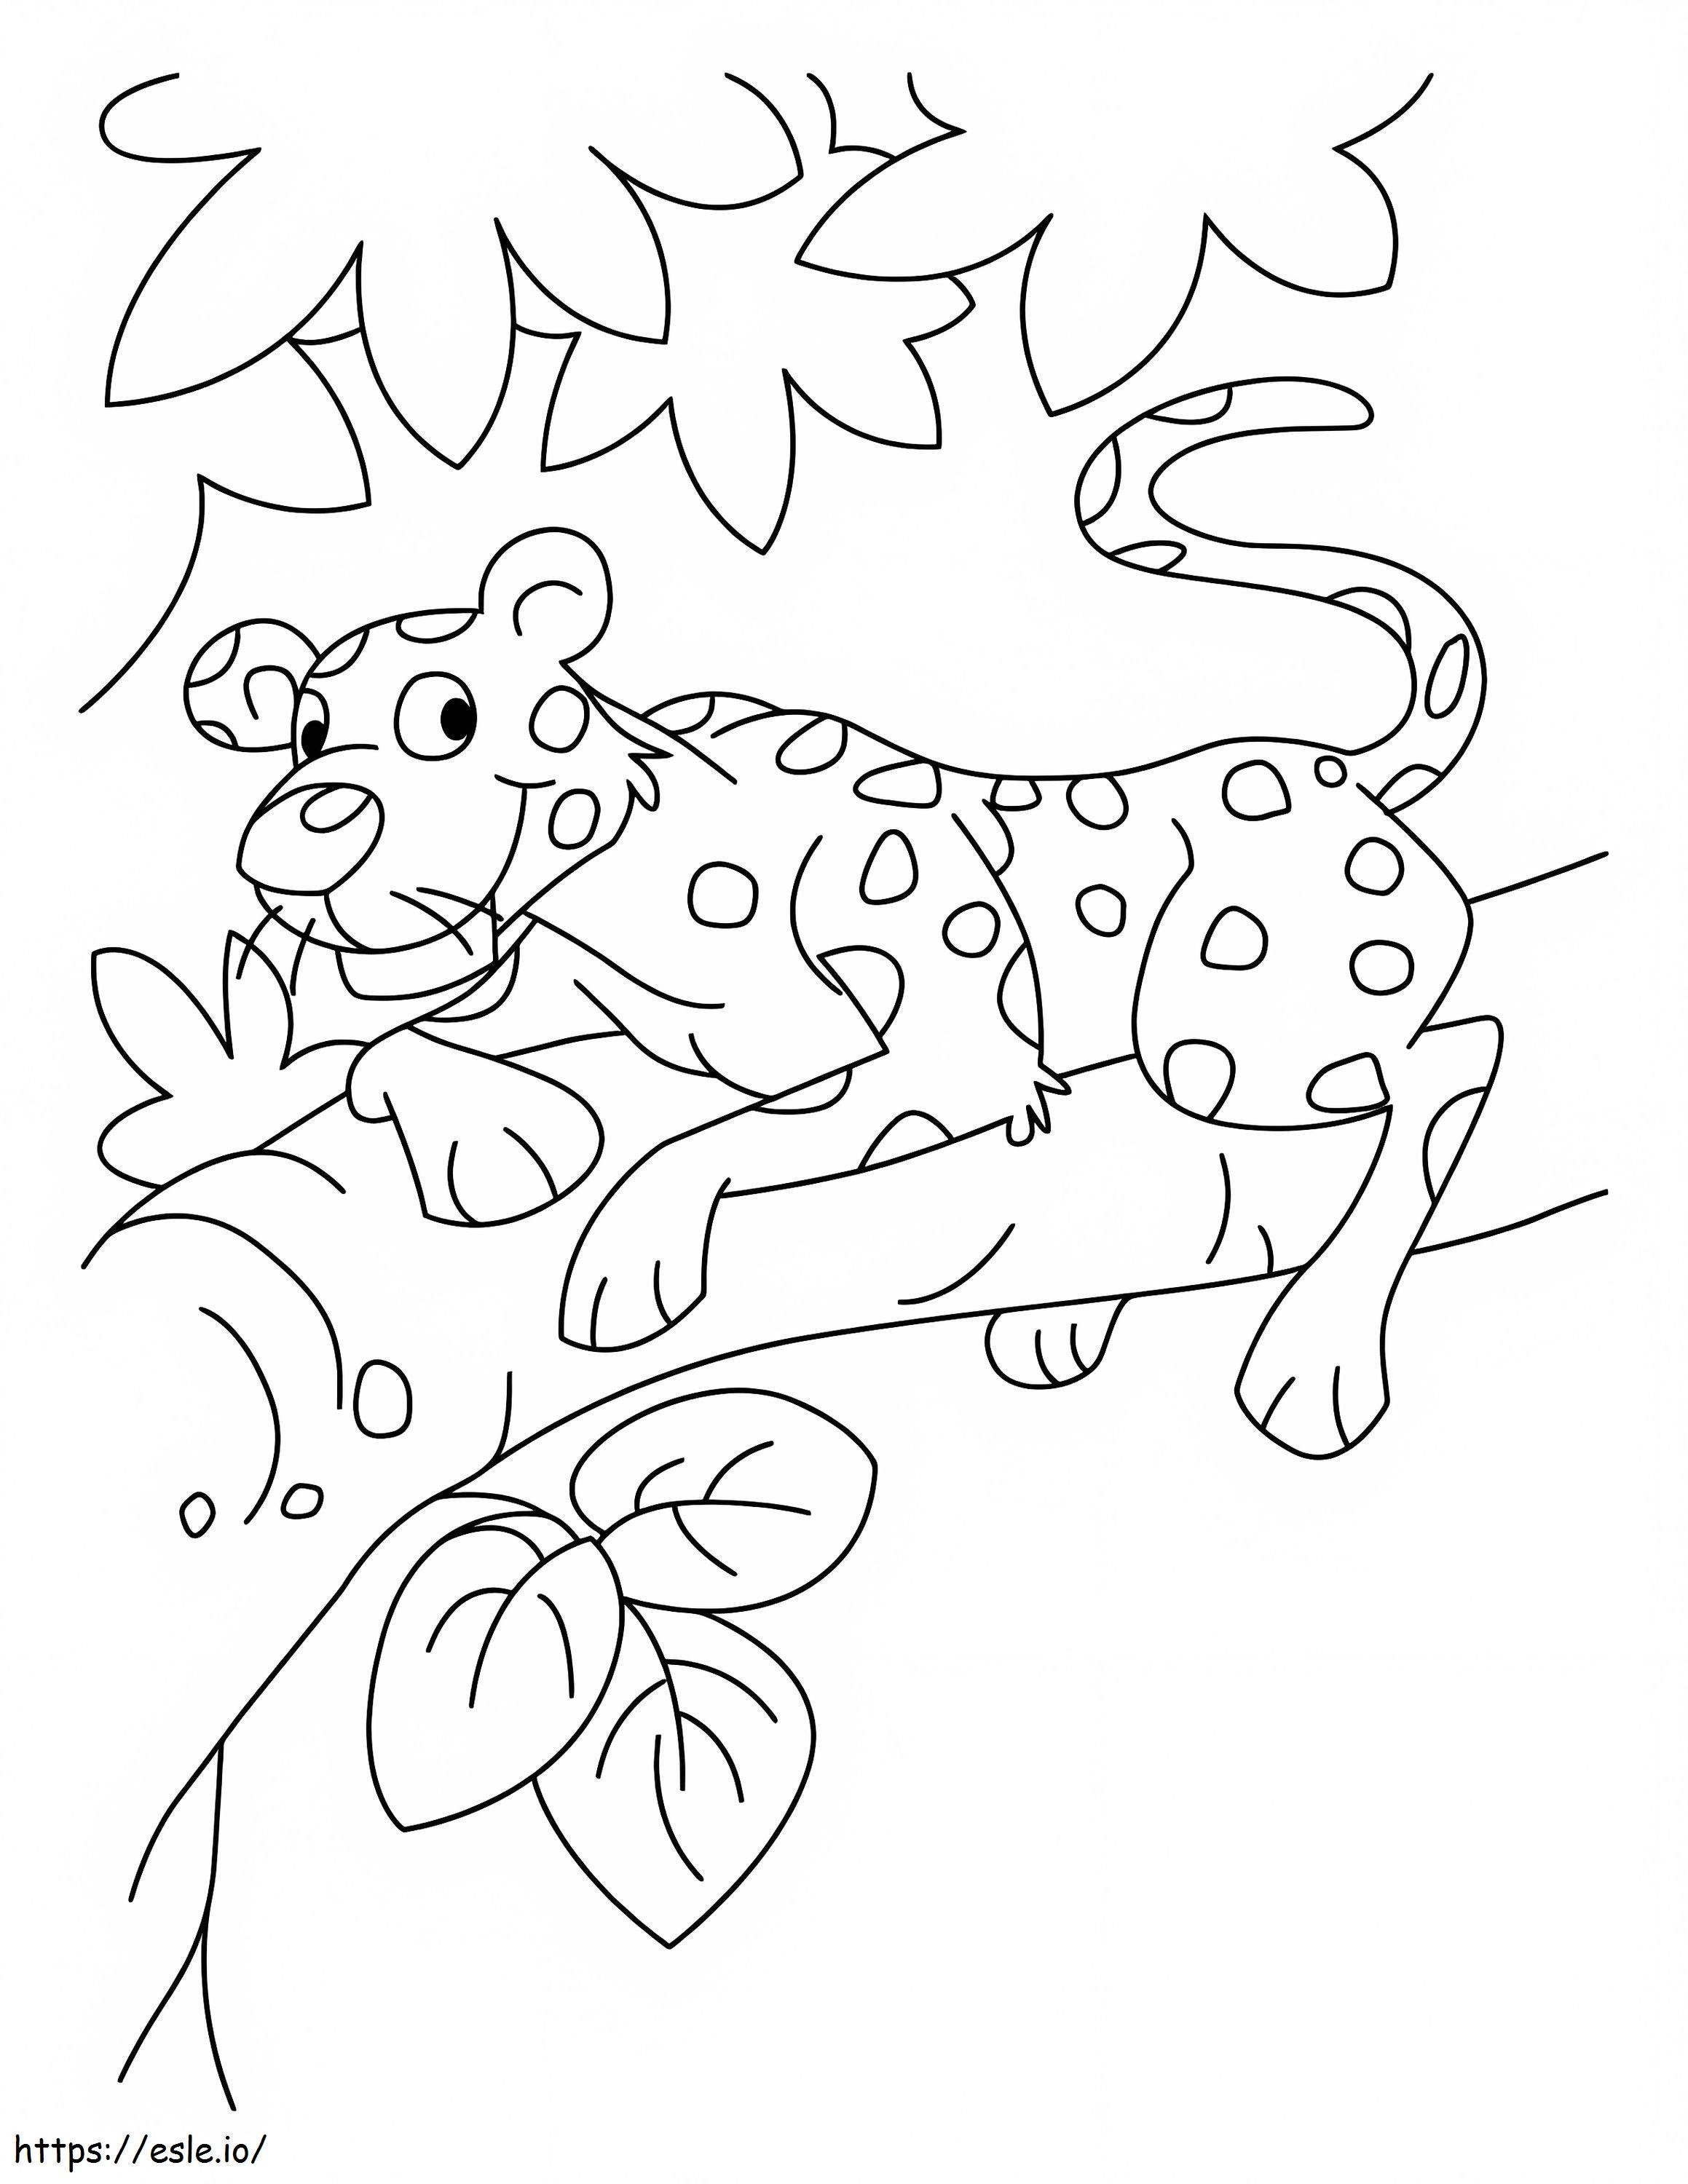 Leopard Lying On Tree Branch coloring page